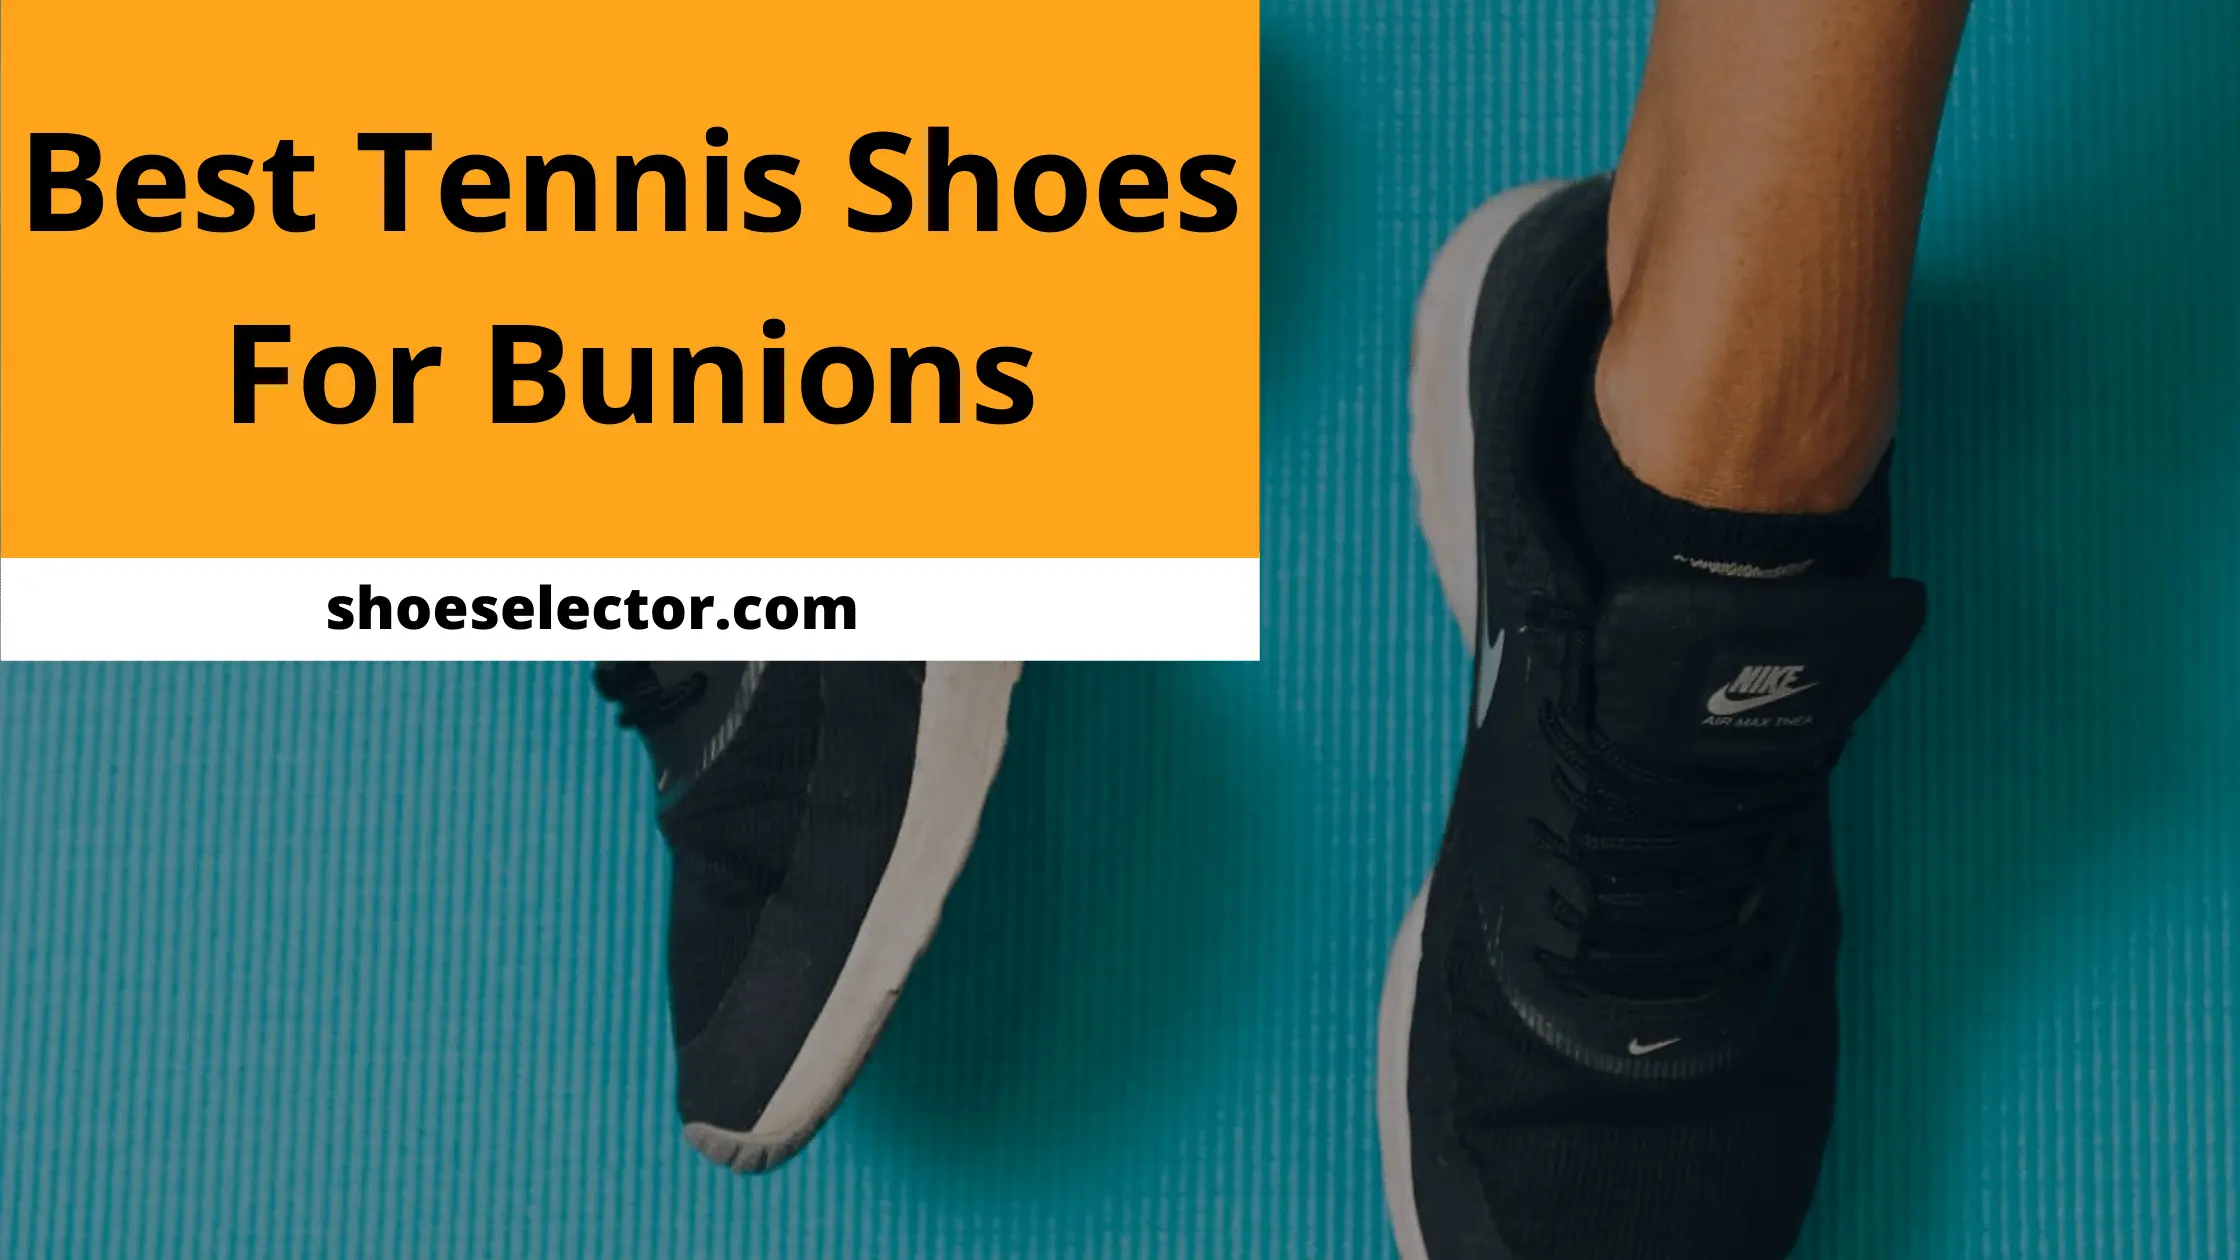 Best Tennis Shoes For Bunions | Supportive And Stylish